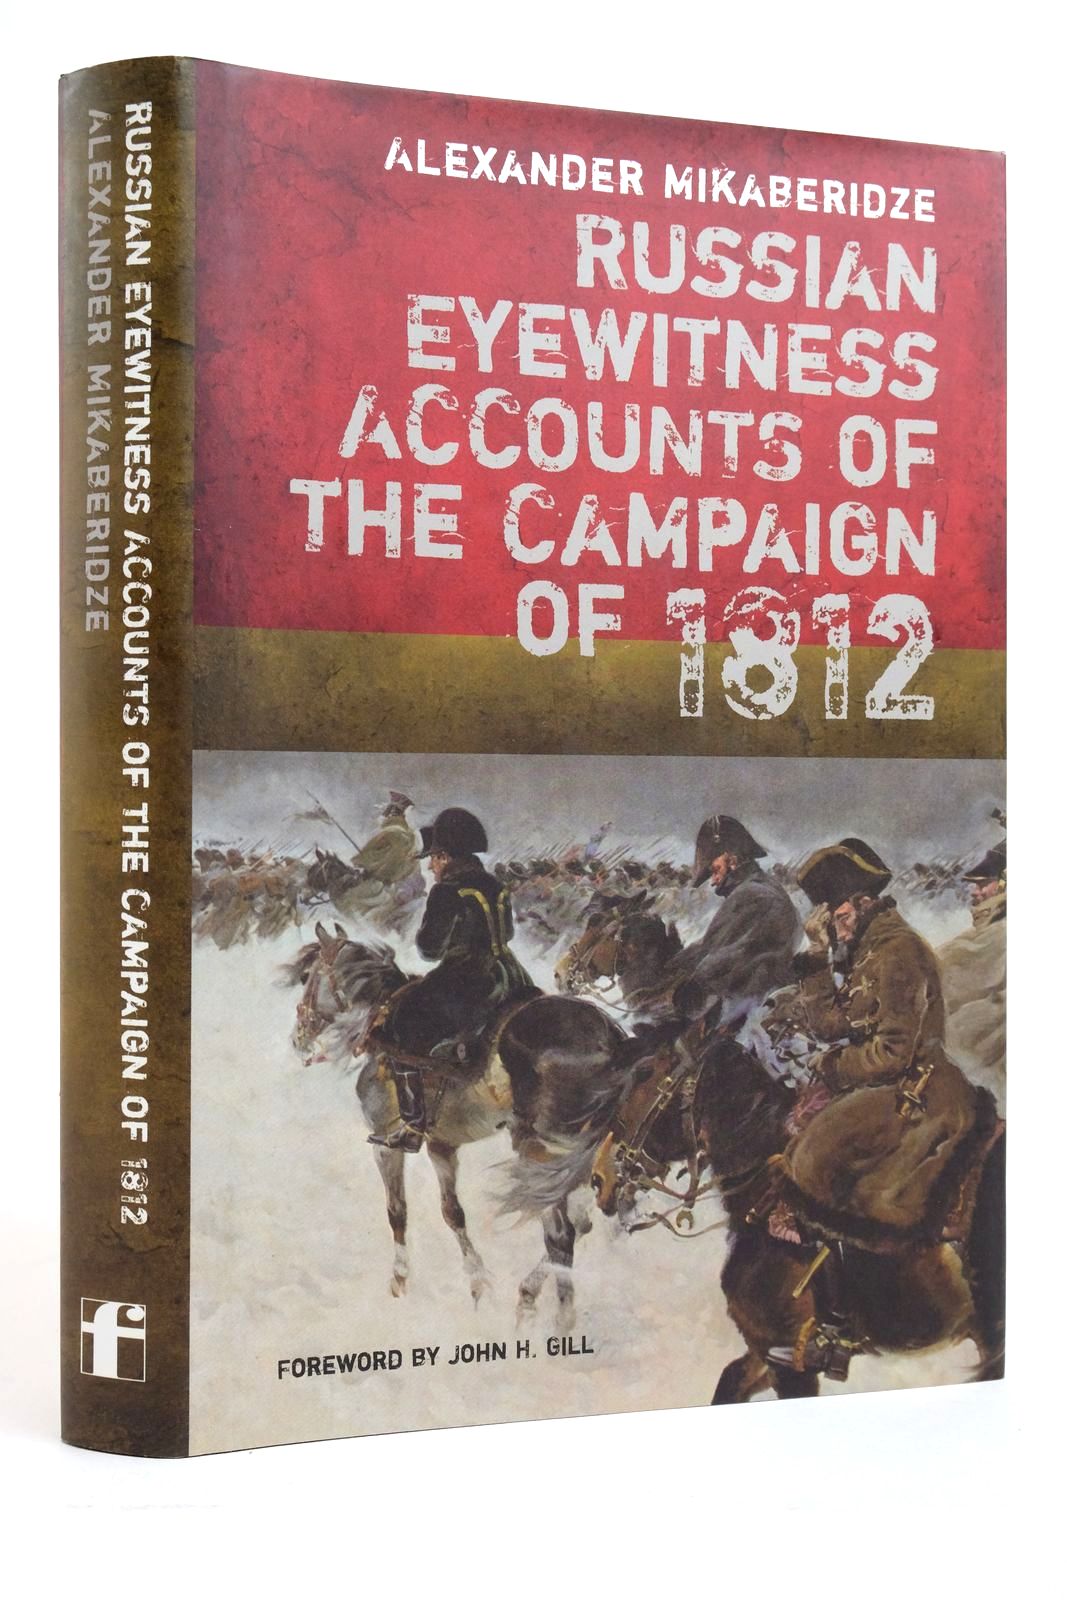 Photo of RUSSIAN EYEWITNESS ACCOUNTS OF THE CAMPAIGN OF 1812 written by Mikaberidze, Alexander Gill, John H. published by Frontline Books (STOCK CODE: 2135753)  for sale by Stella & Rose's Books